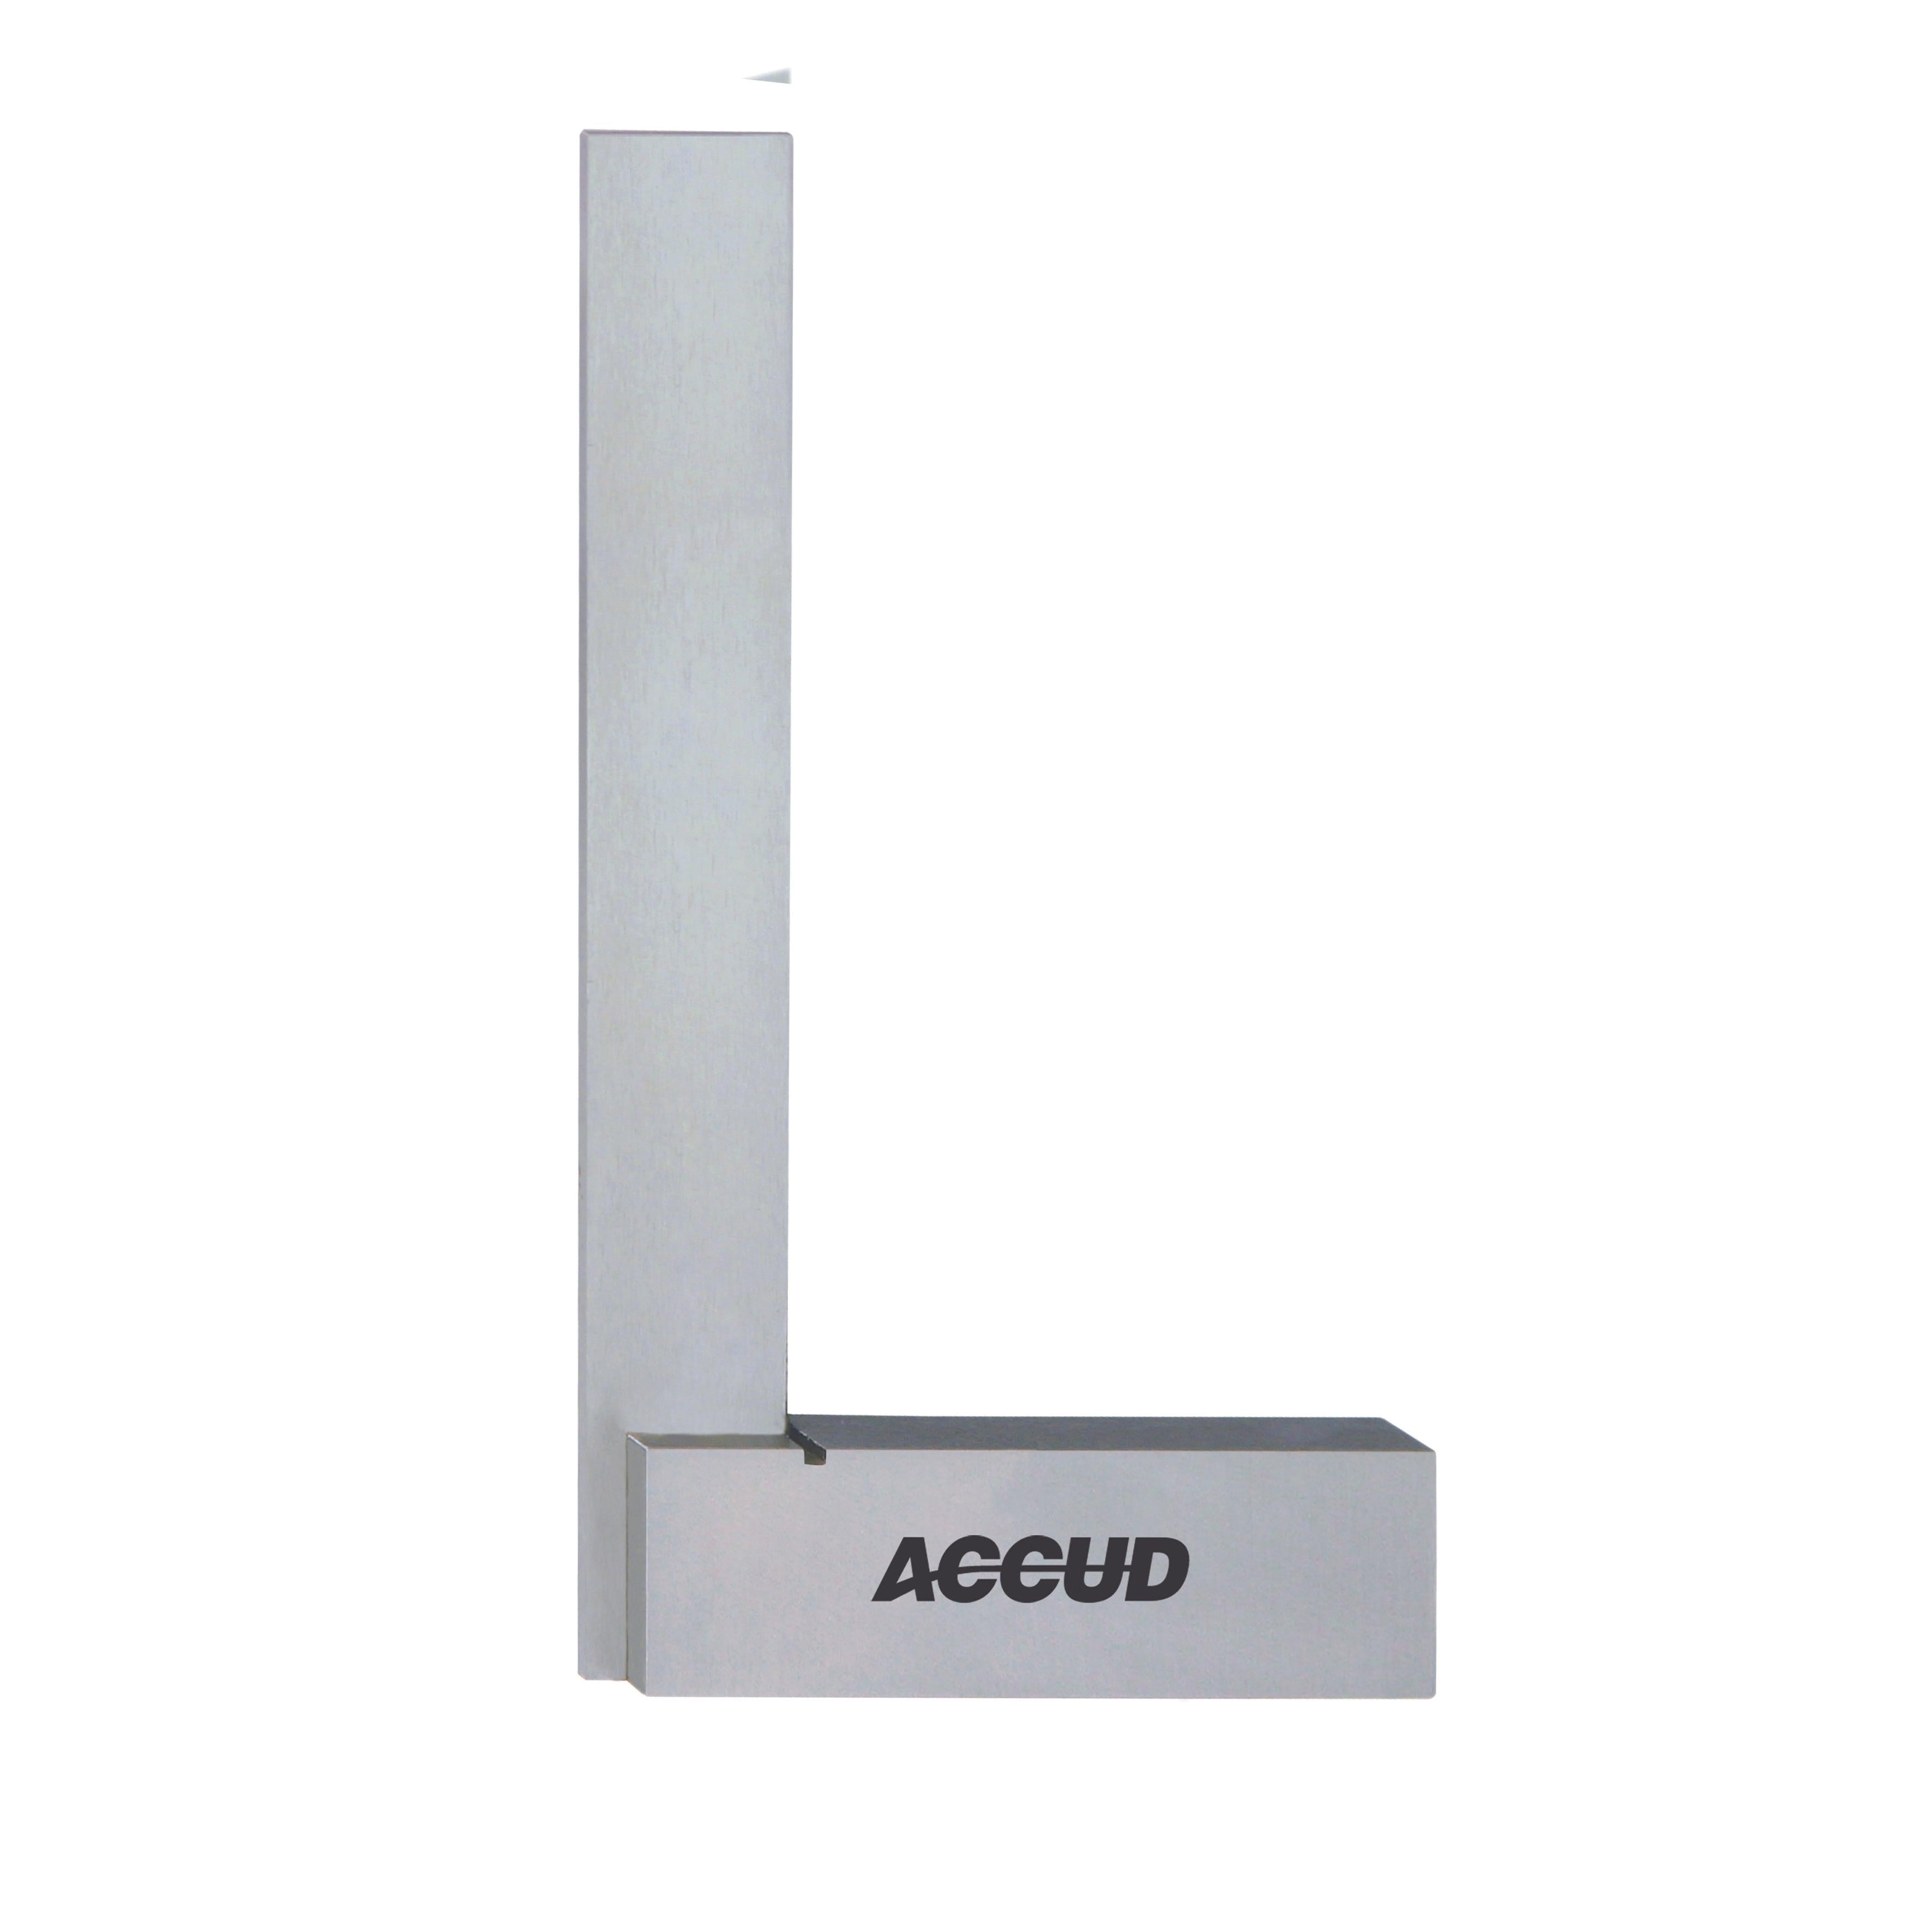 ACCUD | Machinist Square 75X50Mm | 845-003-02 Power Tool Services